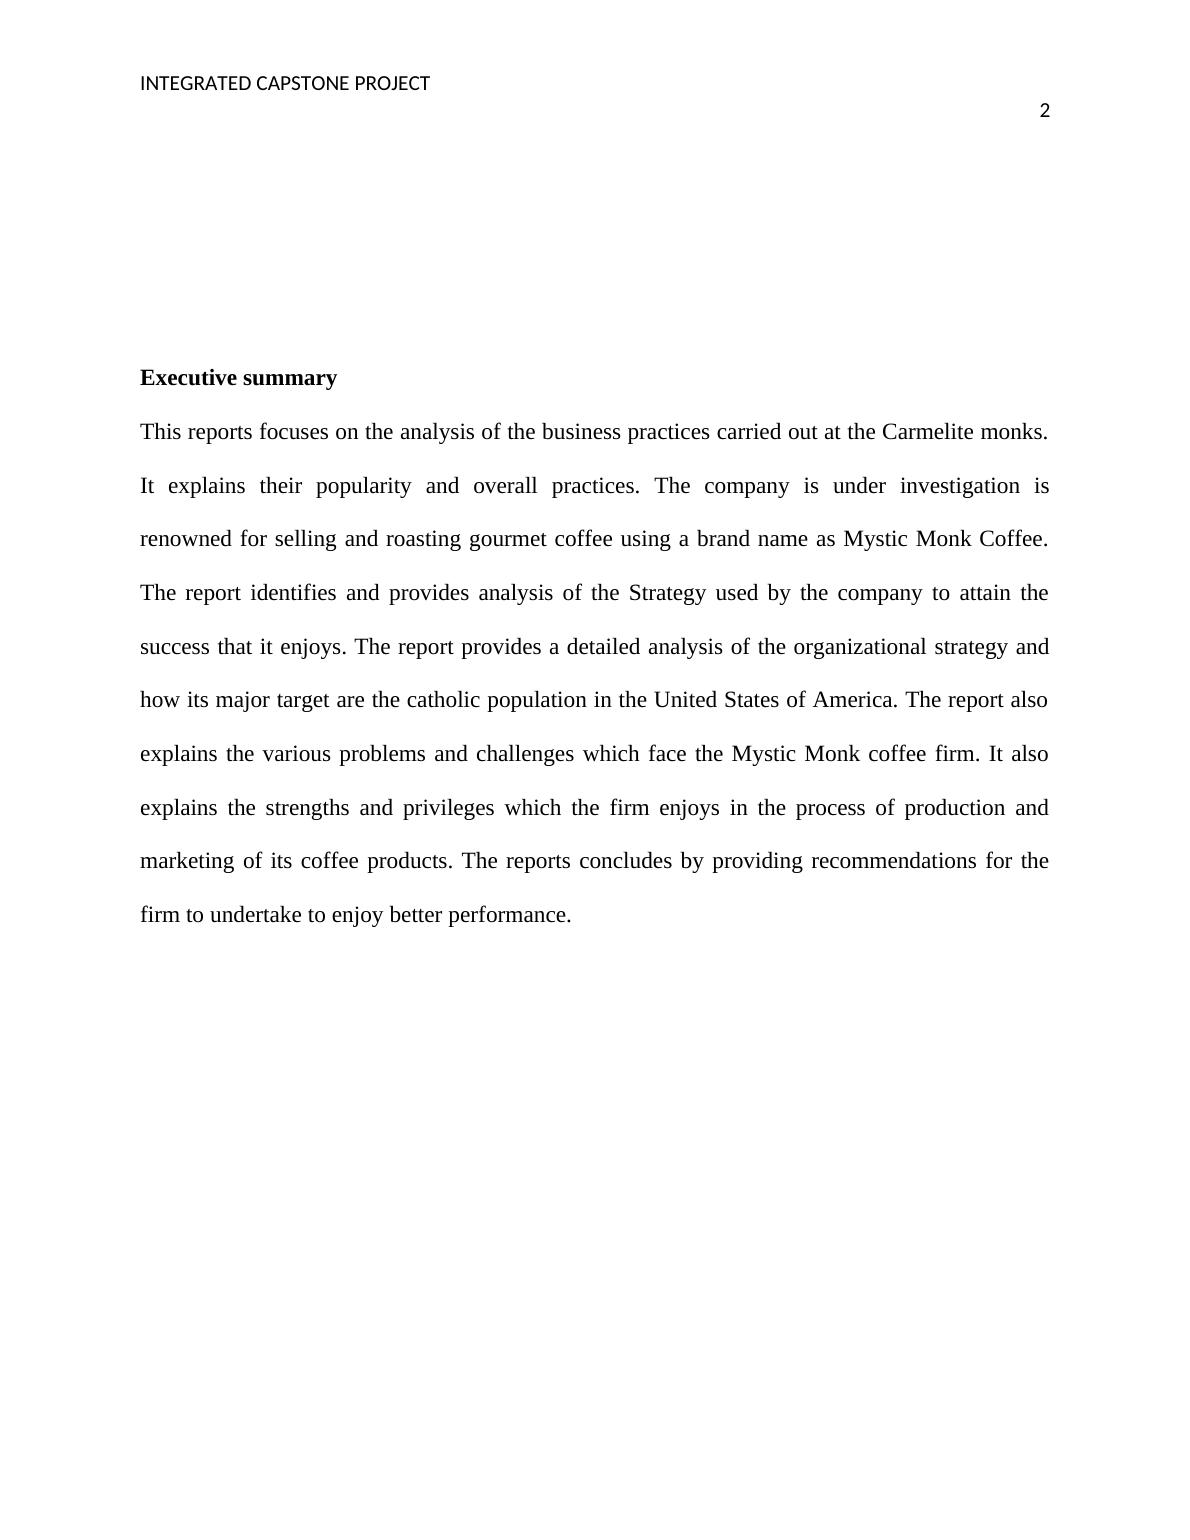 Integrated Capstone Project Assignment PDF_2